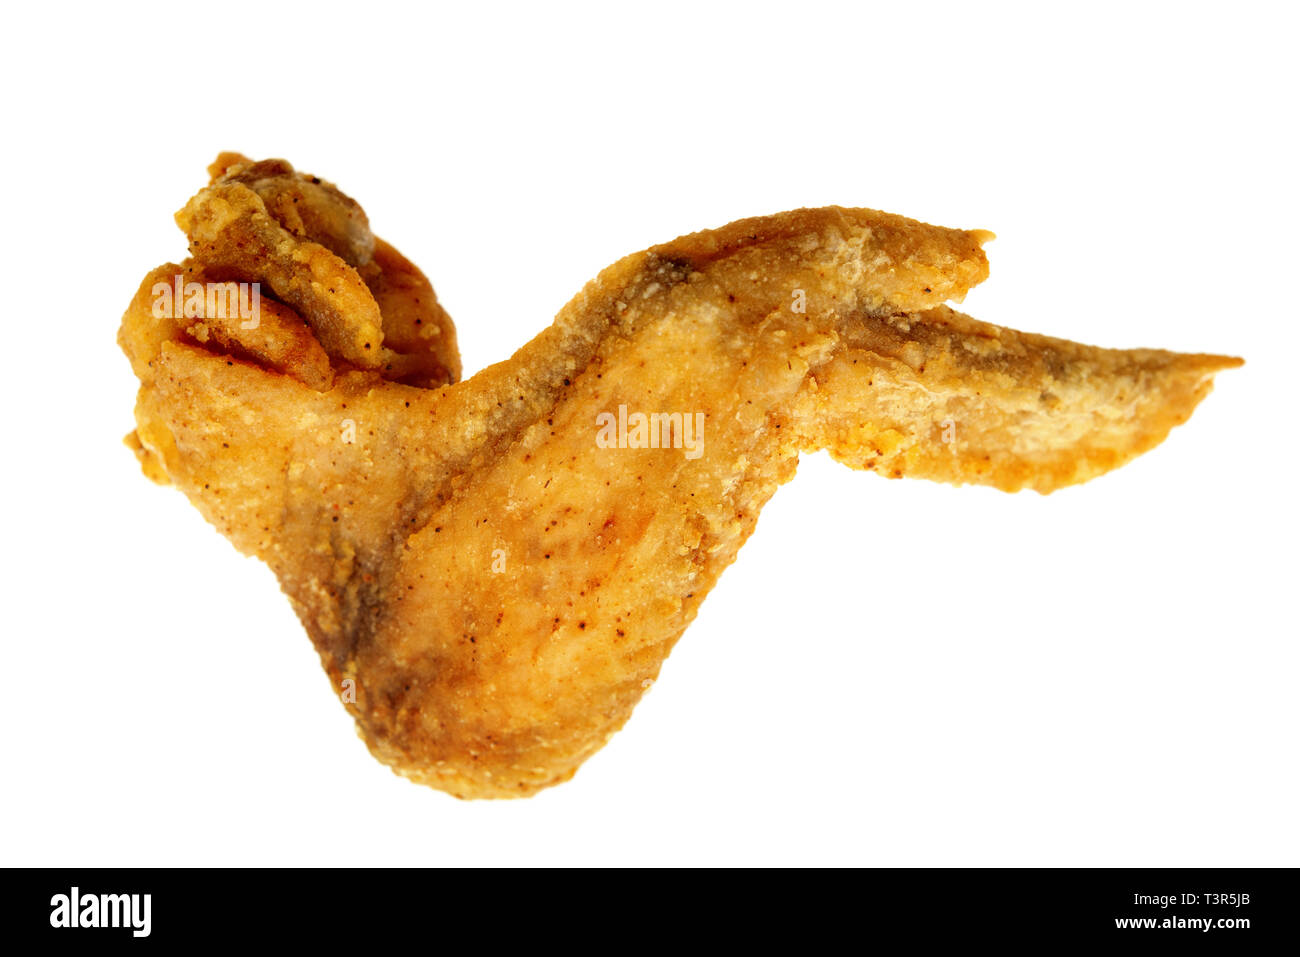 Original recipe fried chicken wing, isolated on white background. Stock Photo